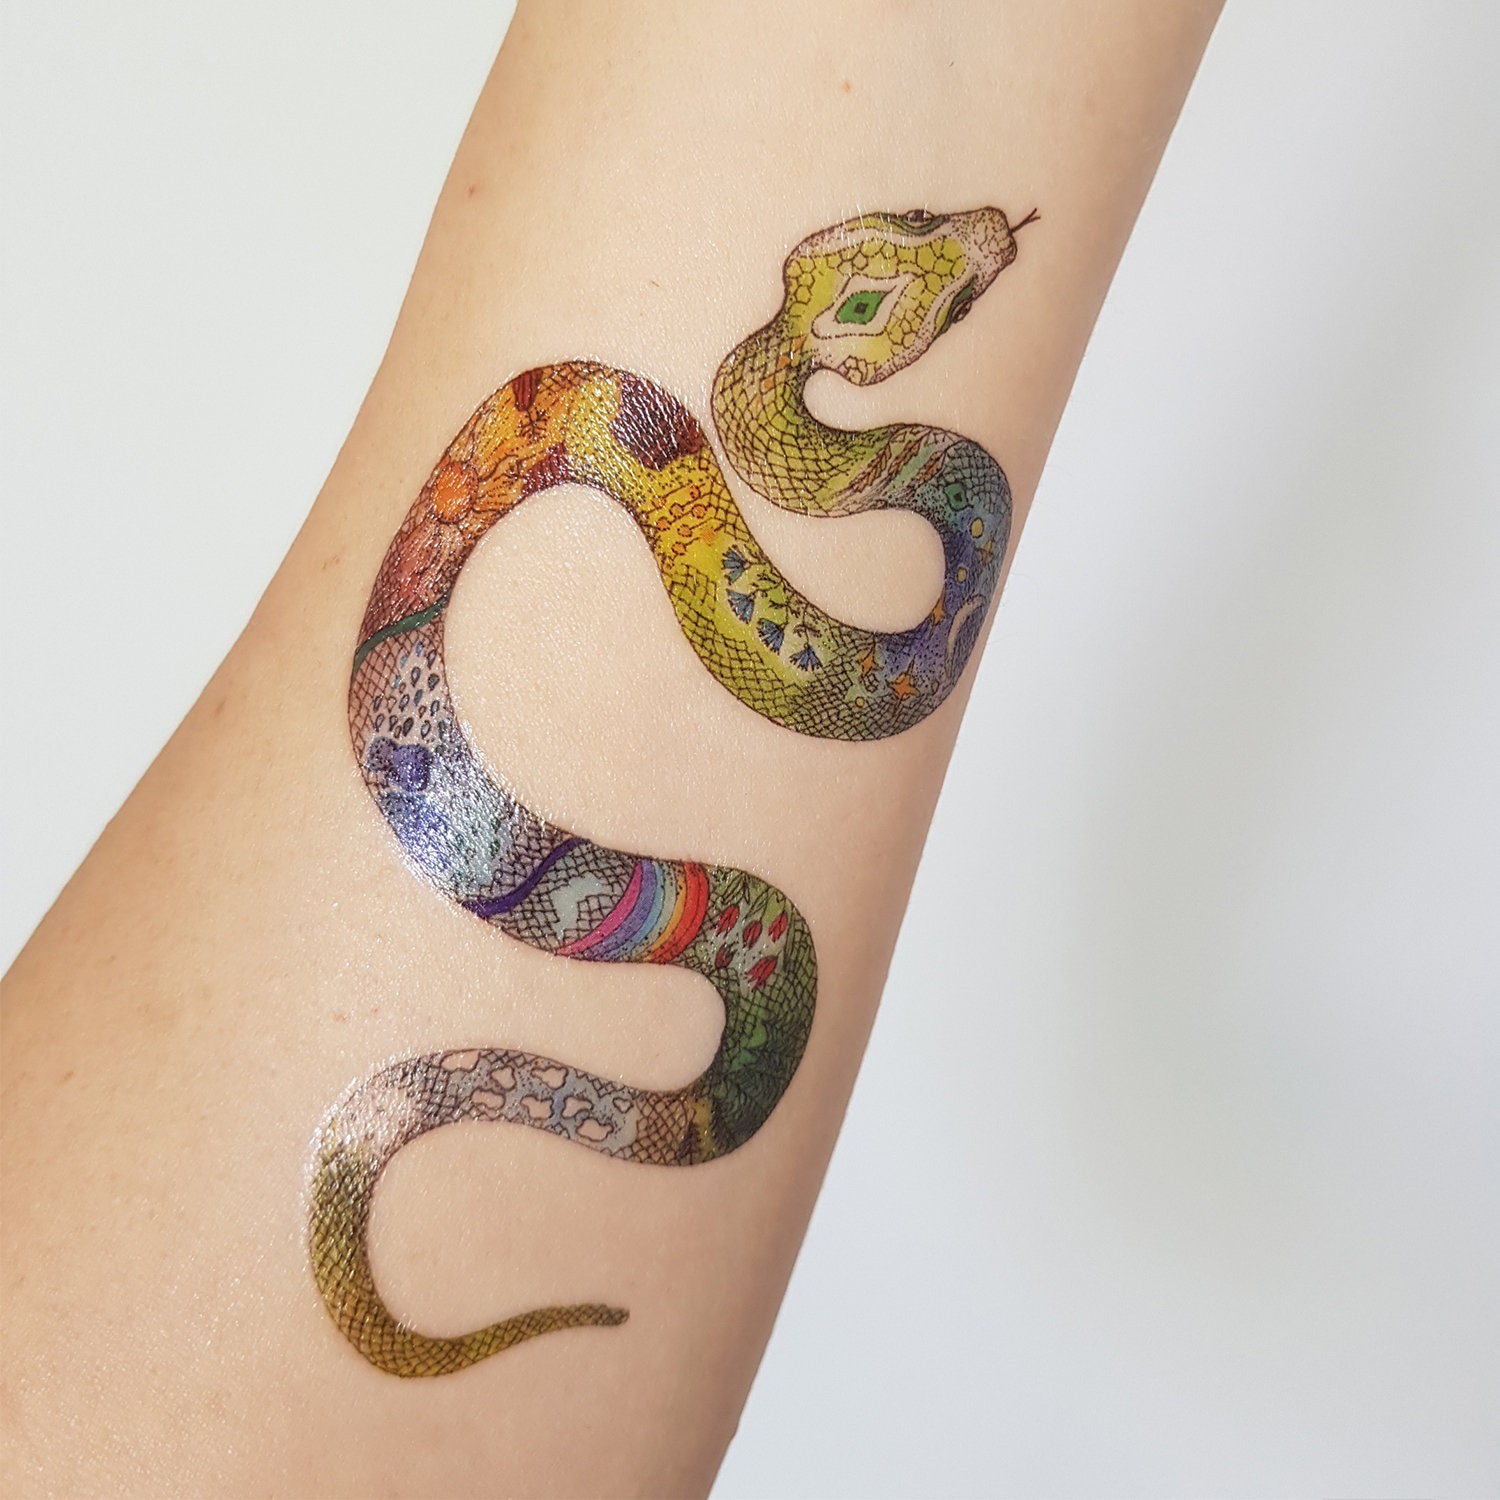 Old School Style Tattoo Cobra Snake Graphic by TribaliumArt